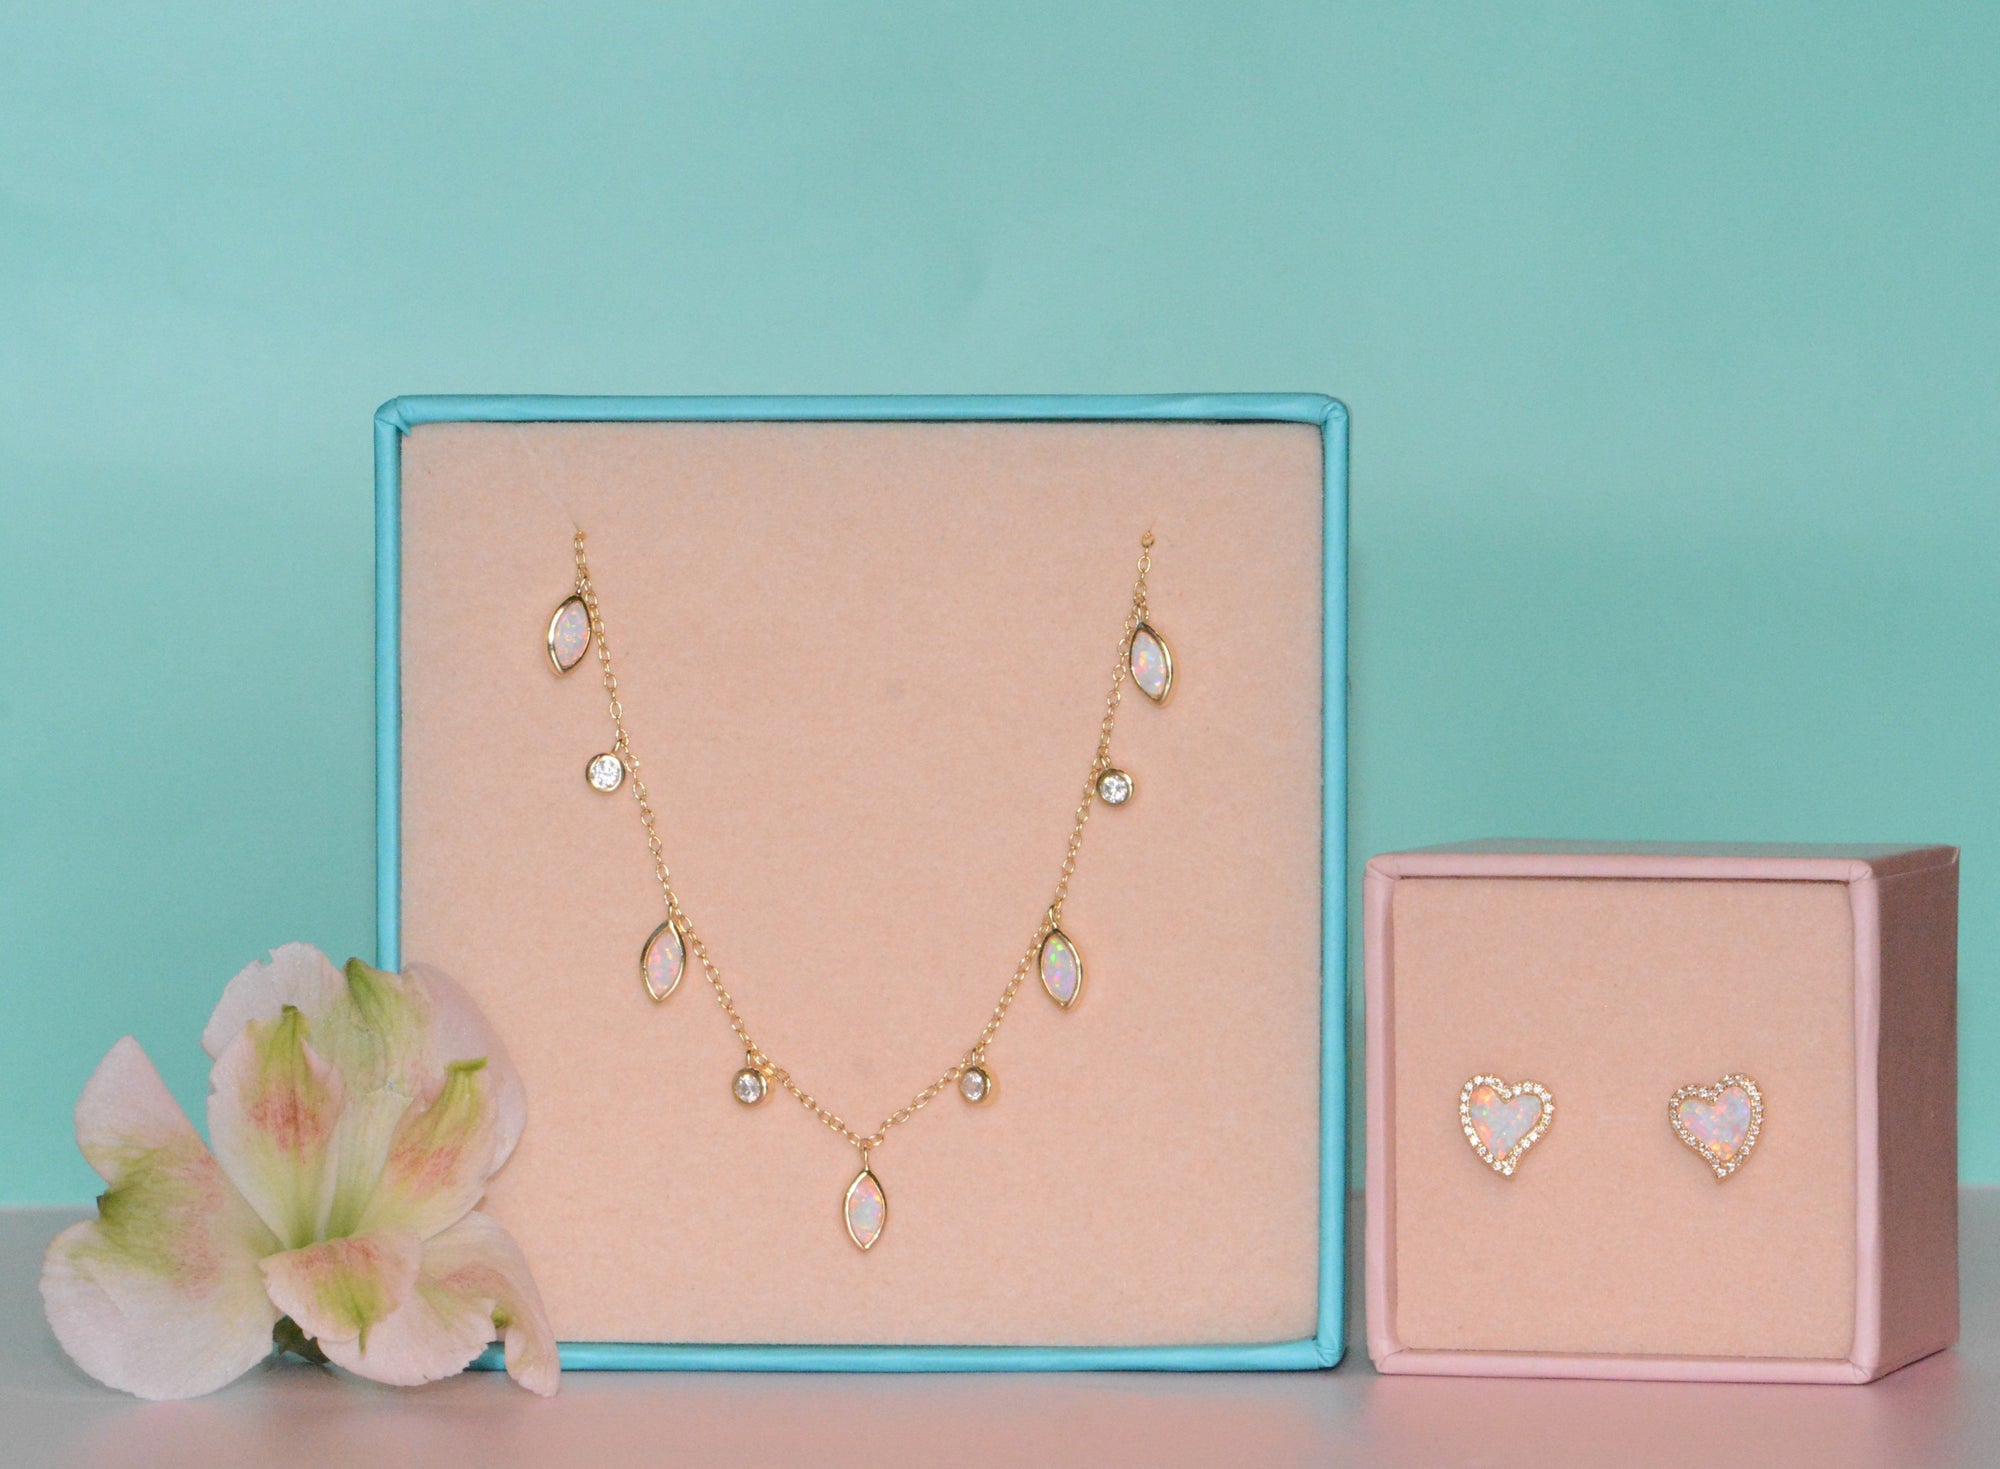 Gift Set | Amore Heart Earrings + Drops of Spring Necklace